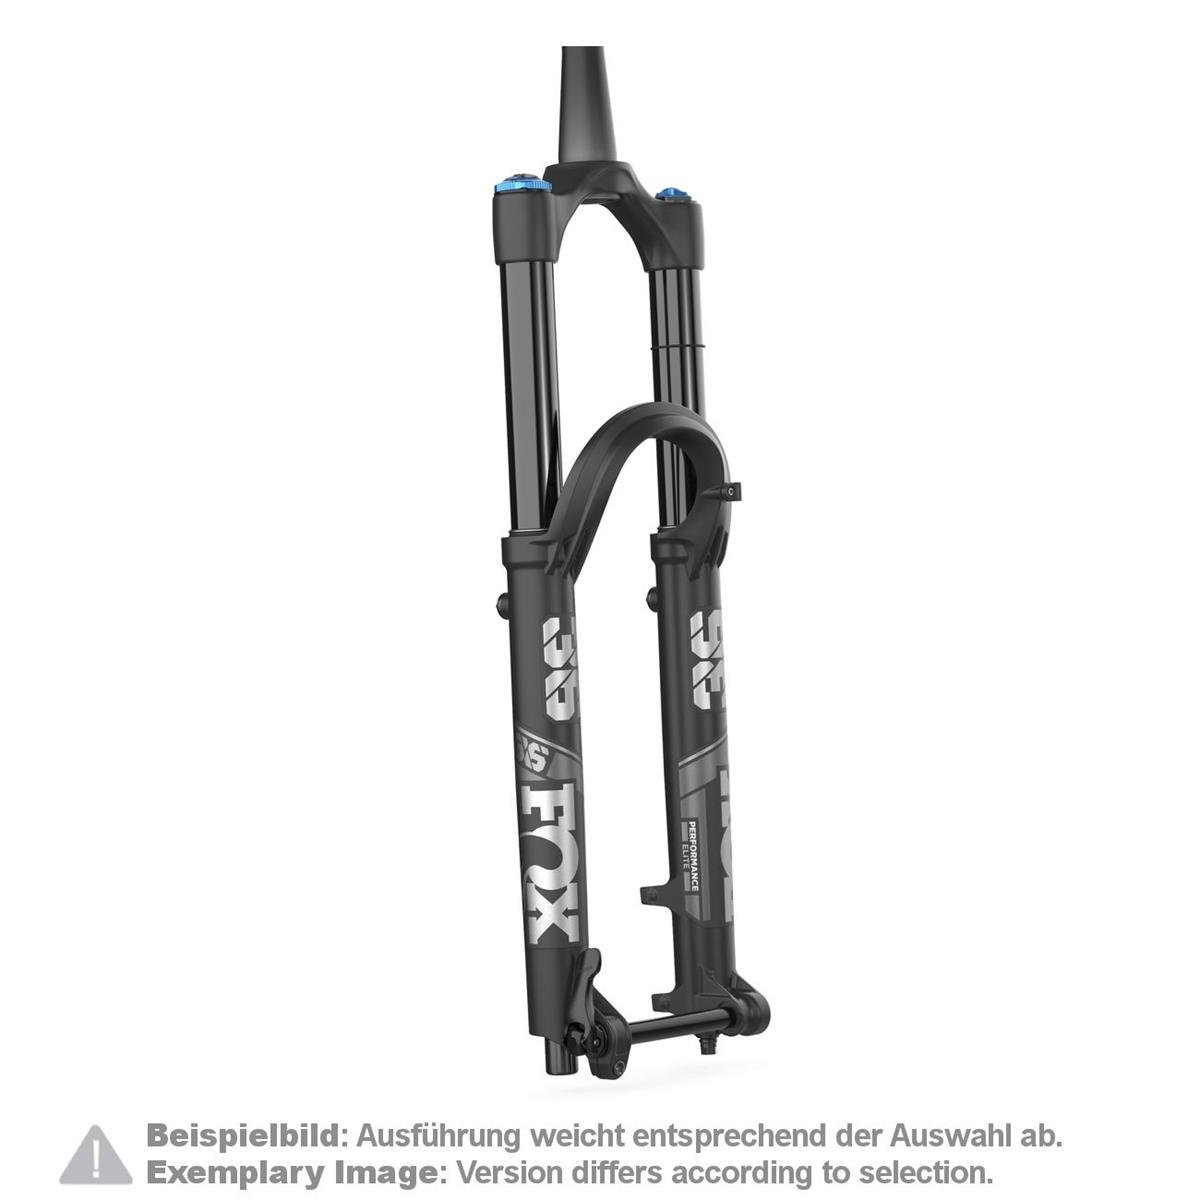 Fox Racing Shox Suspension Fork 36 Float Performance Elite 27.5 Inches, 15x110 mm, GRIP 2, 44 mm Offset, 160 mm